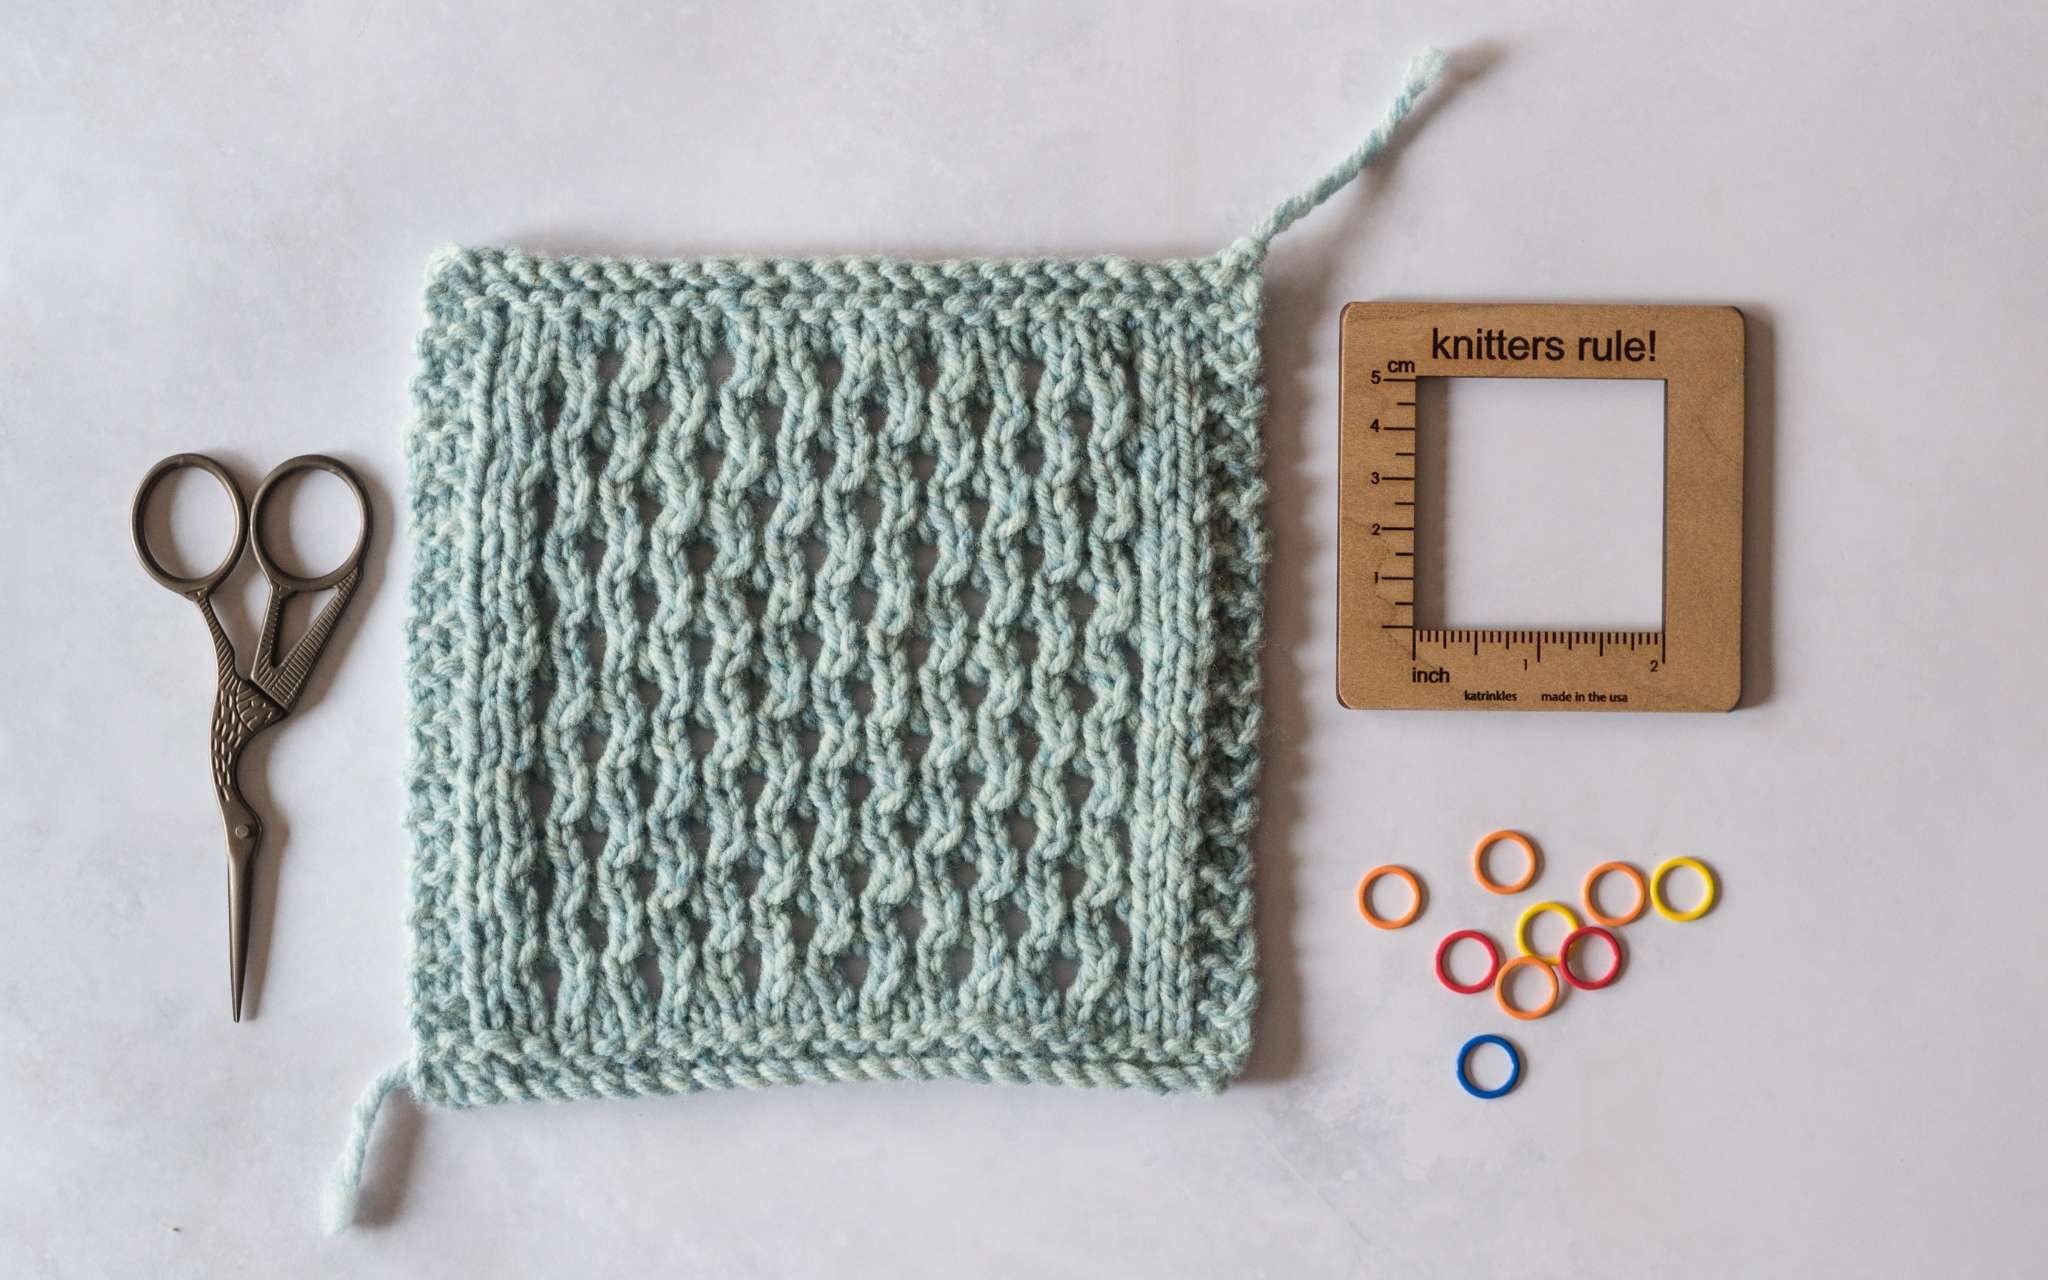 A pale blue cabled swatch lies on a flat surface. A small pair of scissors lie next to it on the left, and to the right is a square wooden swatch measuring tool and brightly coloured stitch markers.